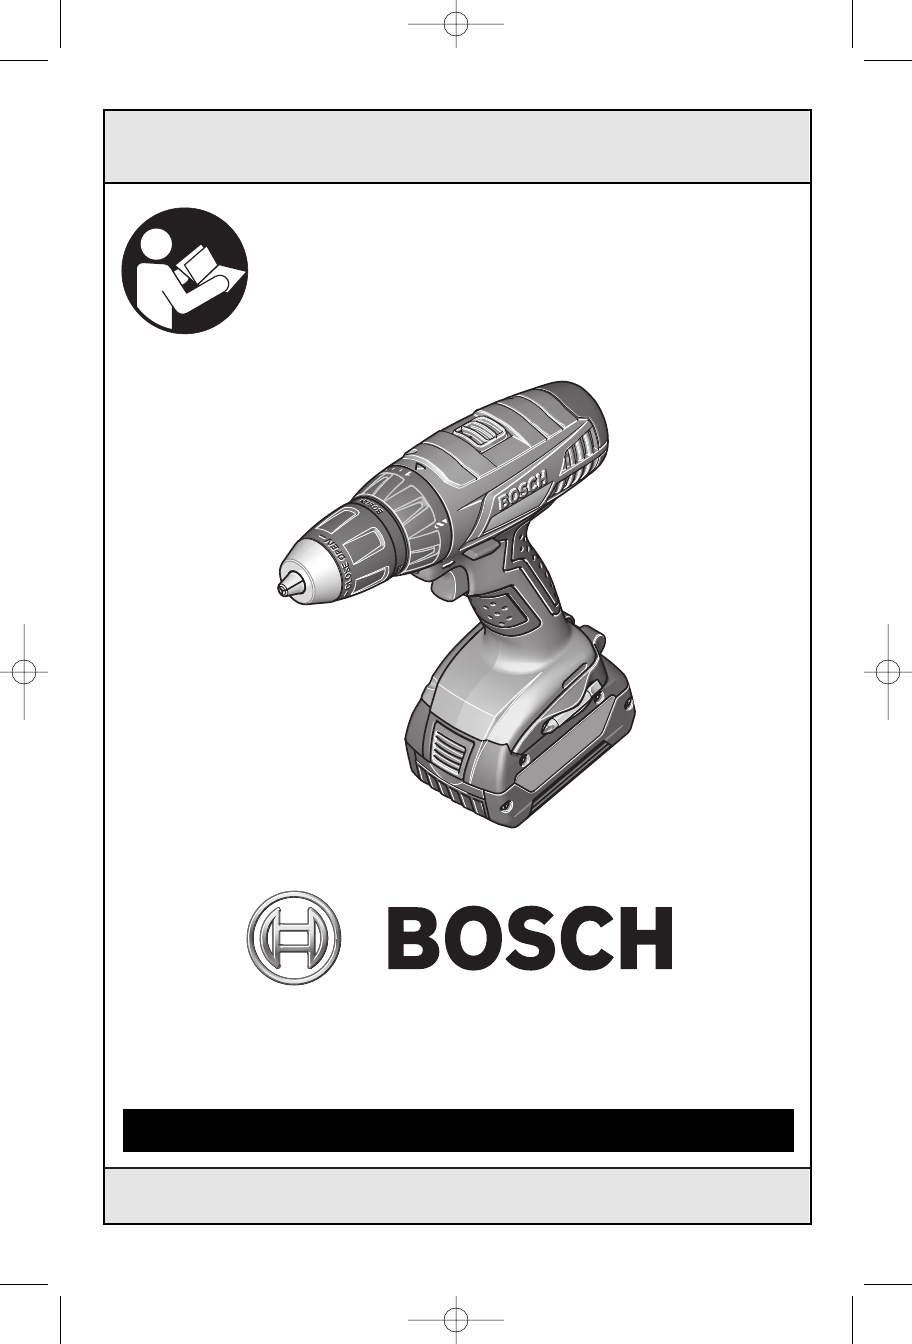 Bosch tools owners manuals